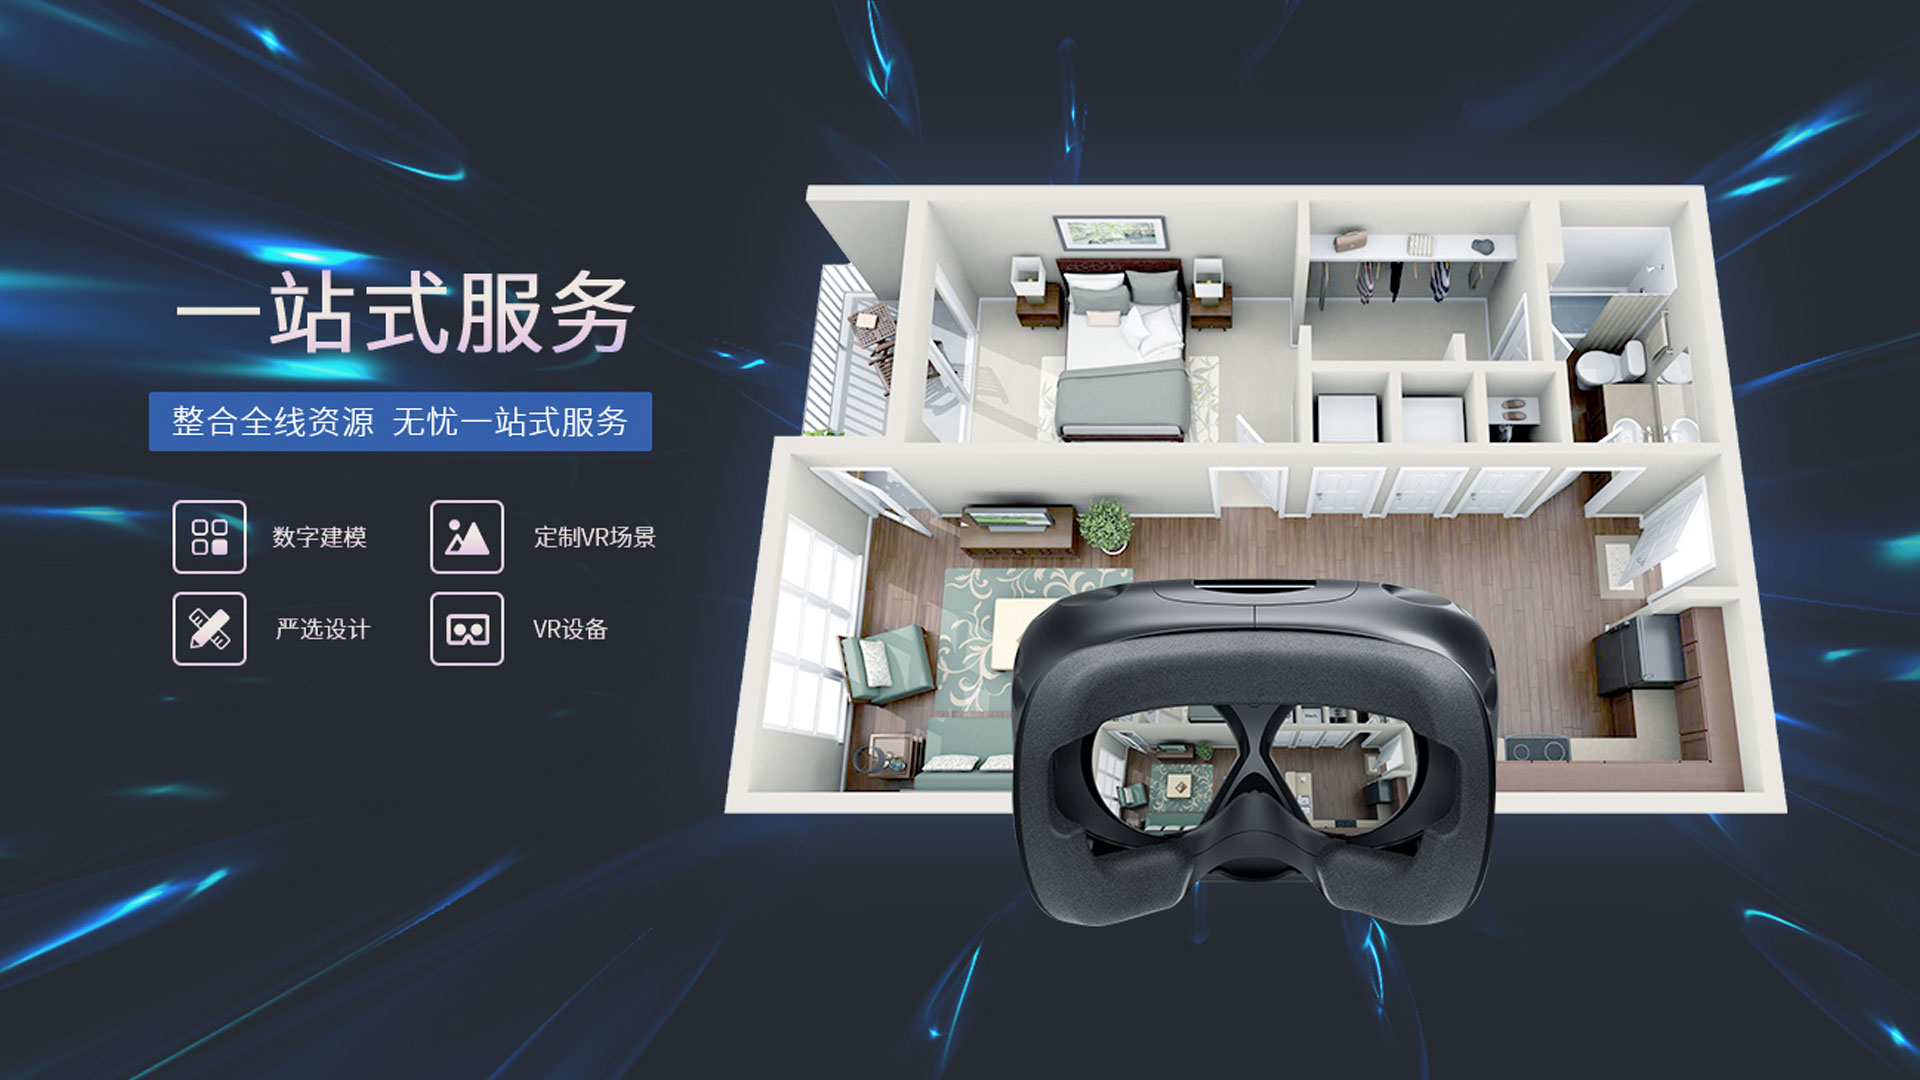 PanguVR mixes virtual reality and artificial intelligence to revolutionize interior design